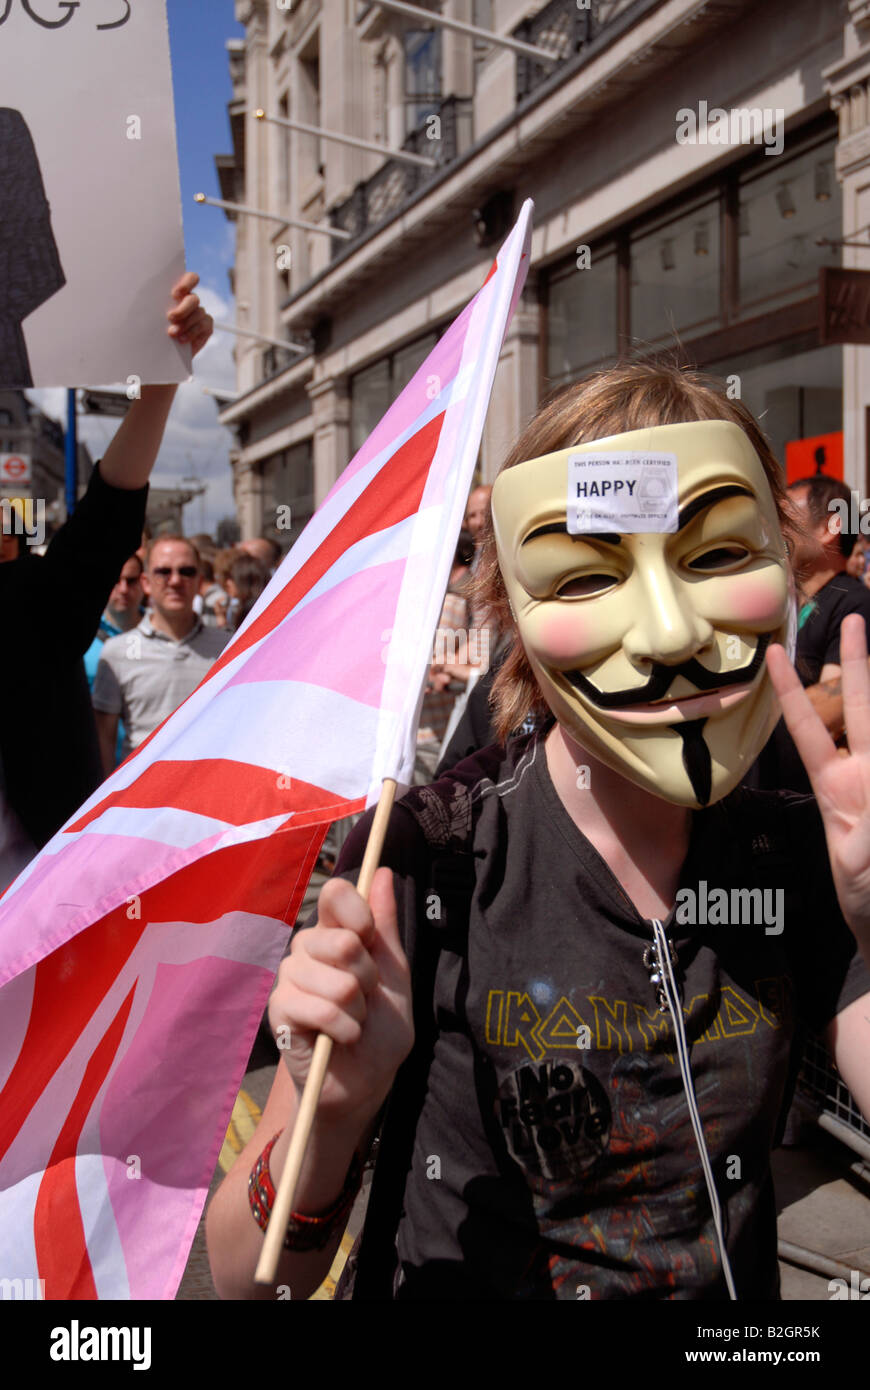 Protest group called Anonymous in London's Gay Pride March / carnival through streets of central London Summer 2008 Stock Photo